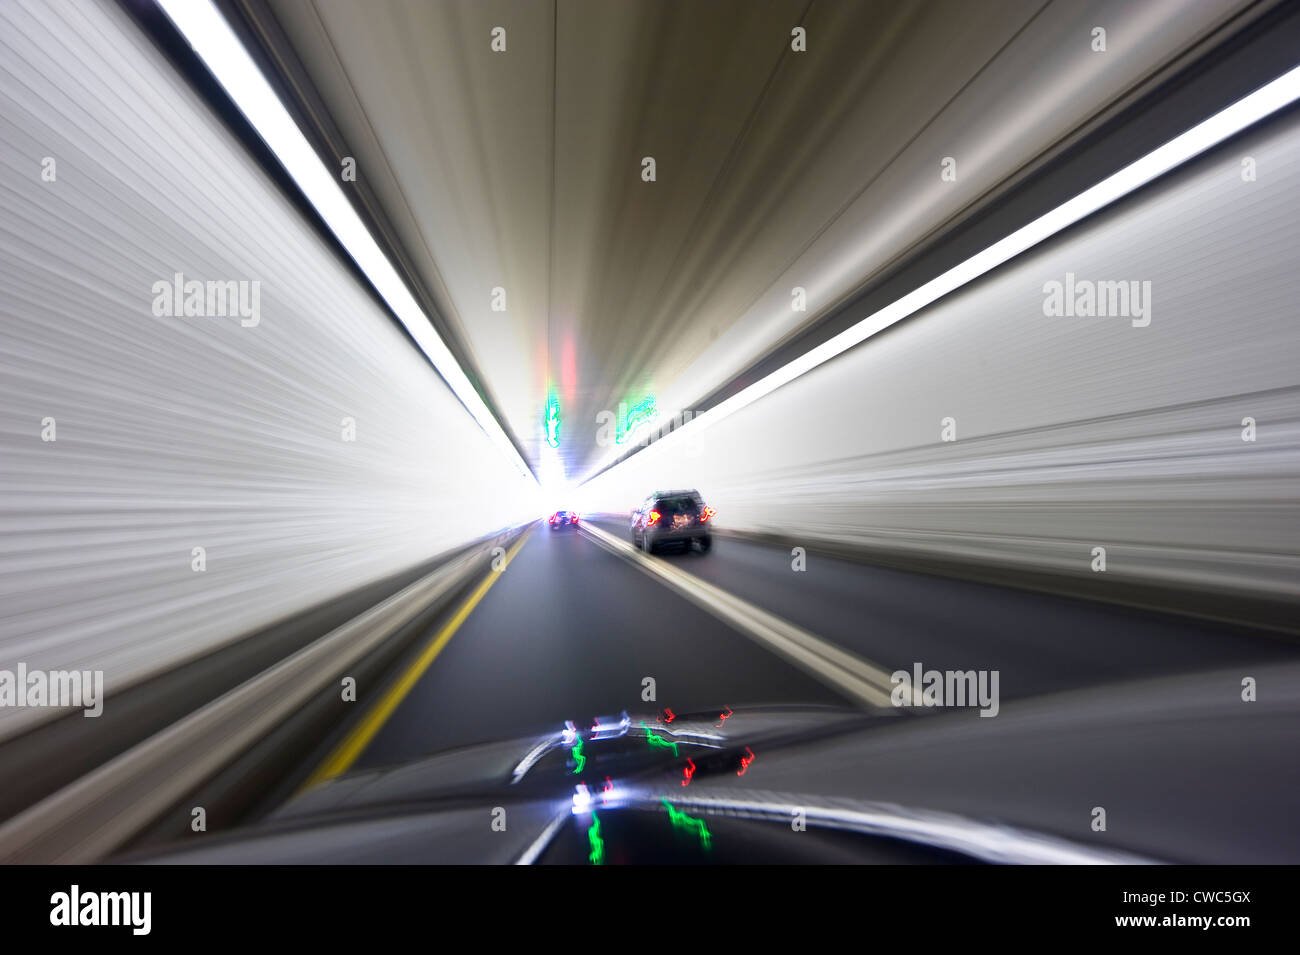 Cars Driving In Tunnel With Motion Blur Stock Photo